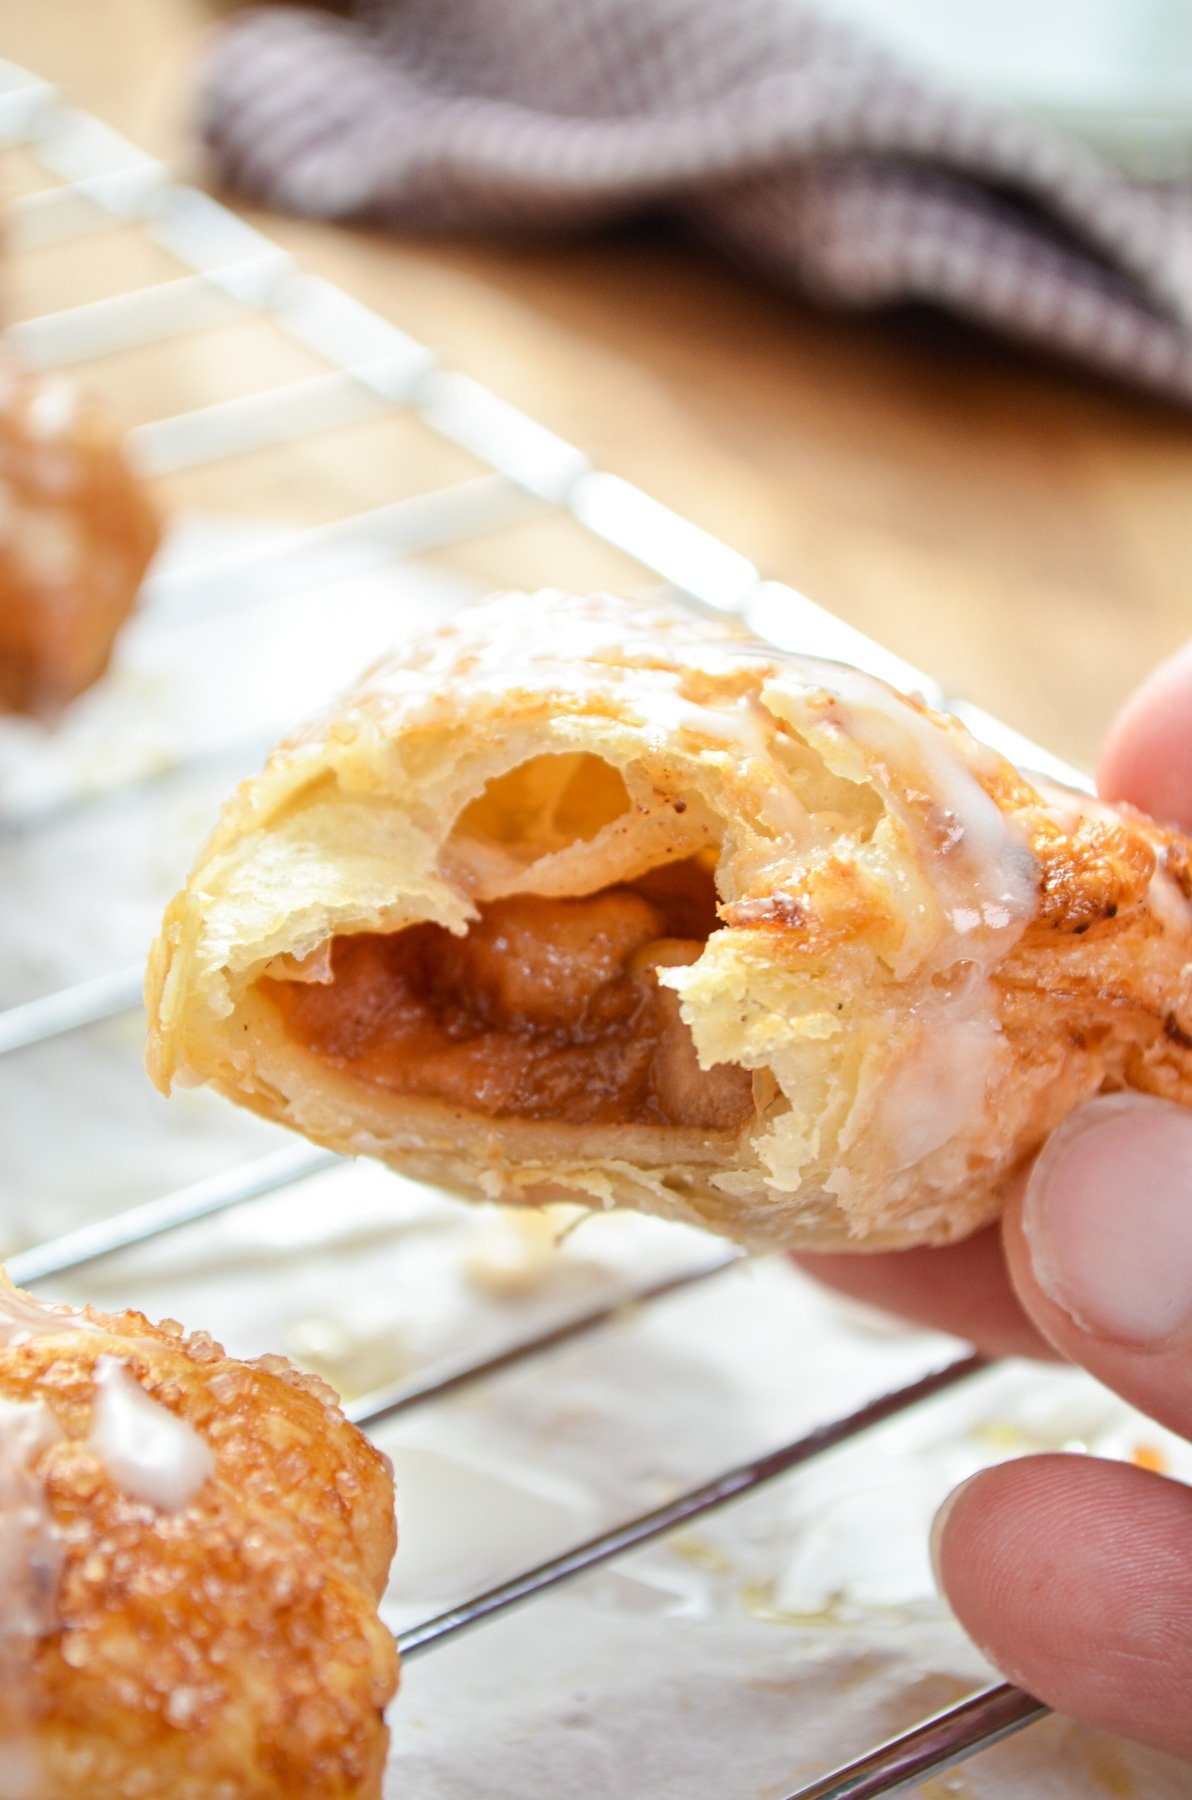 An apple turnover with a bite taken out of it, being placed on a wire rack.